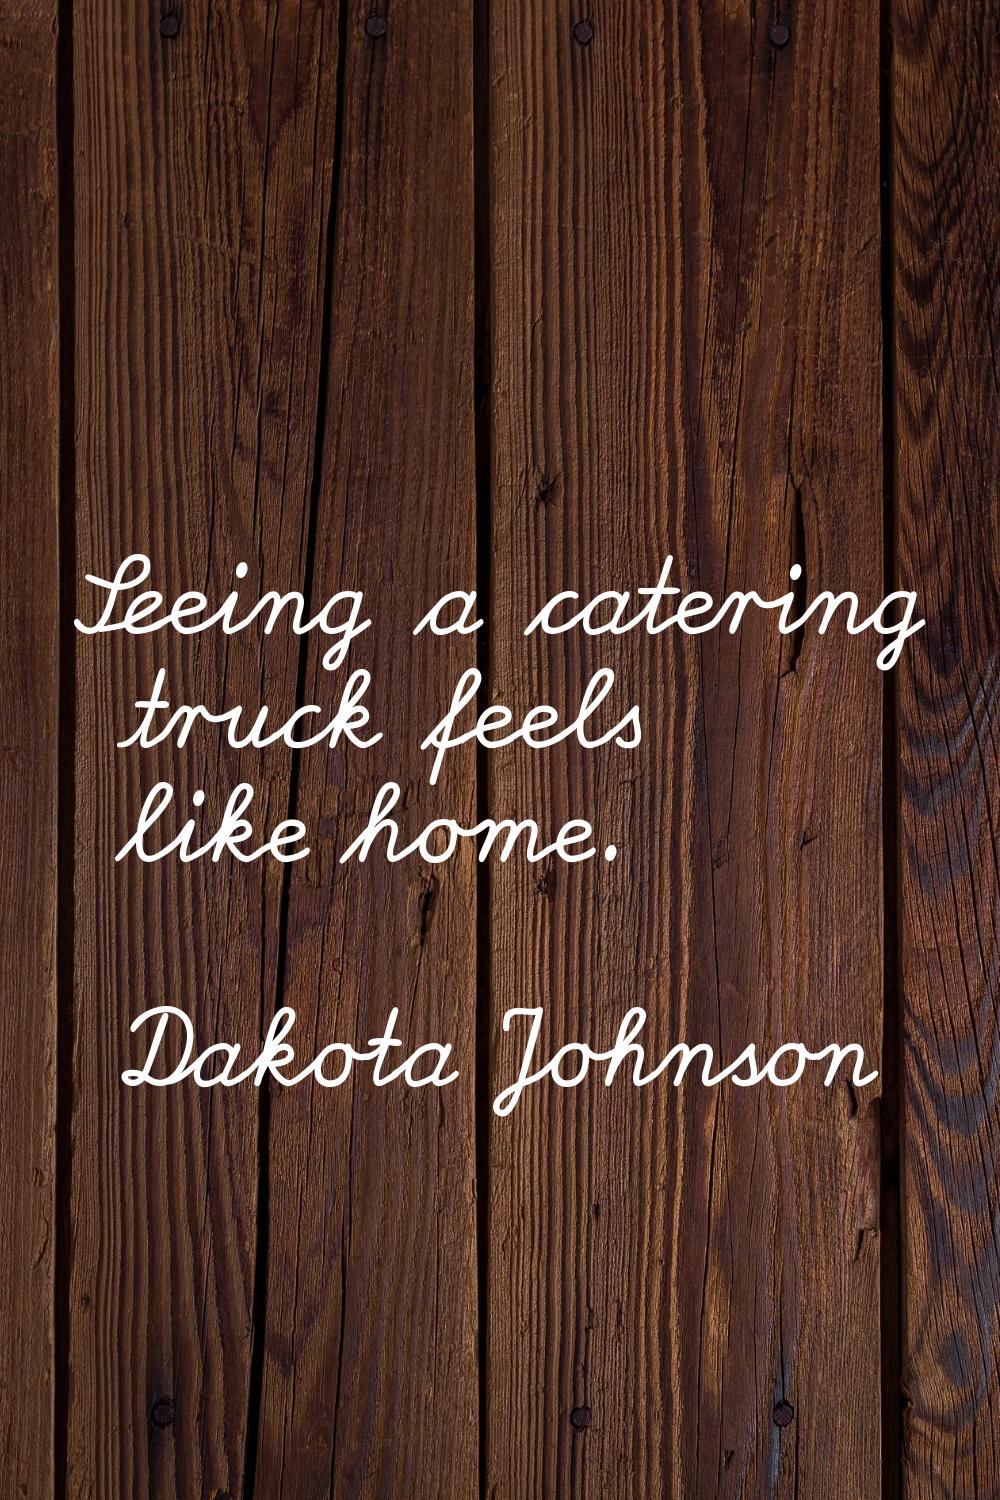 Seeing a catering truck feels like home.